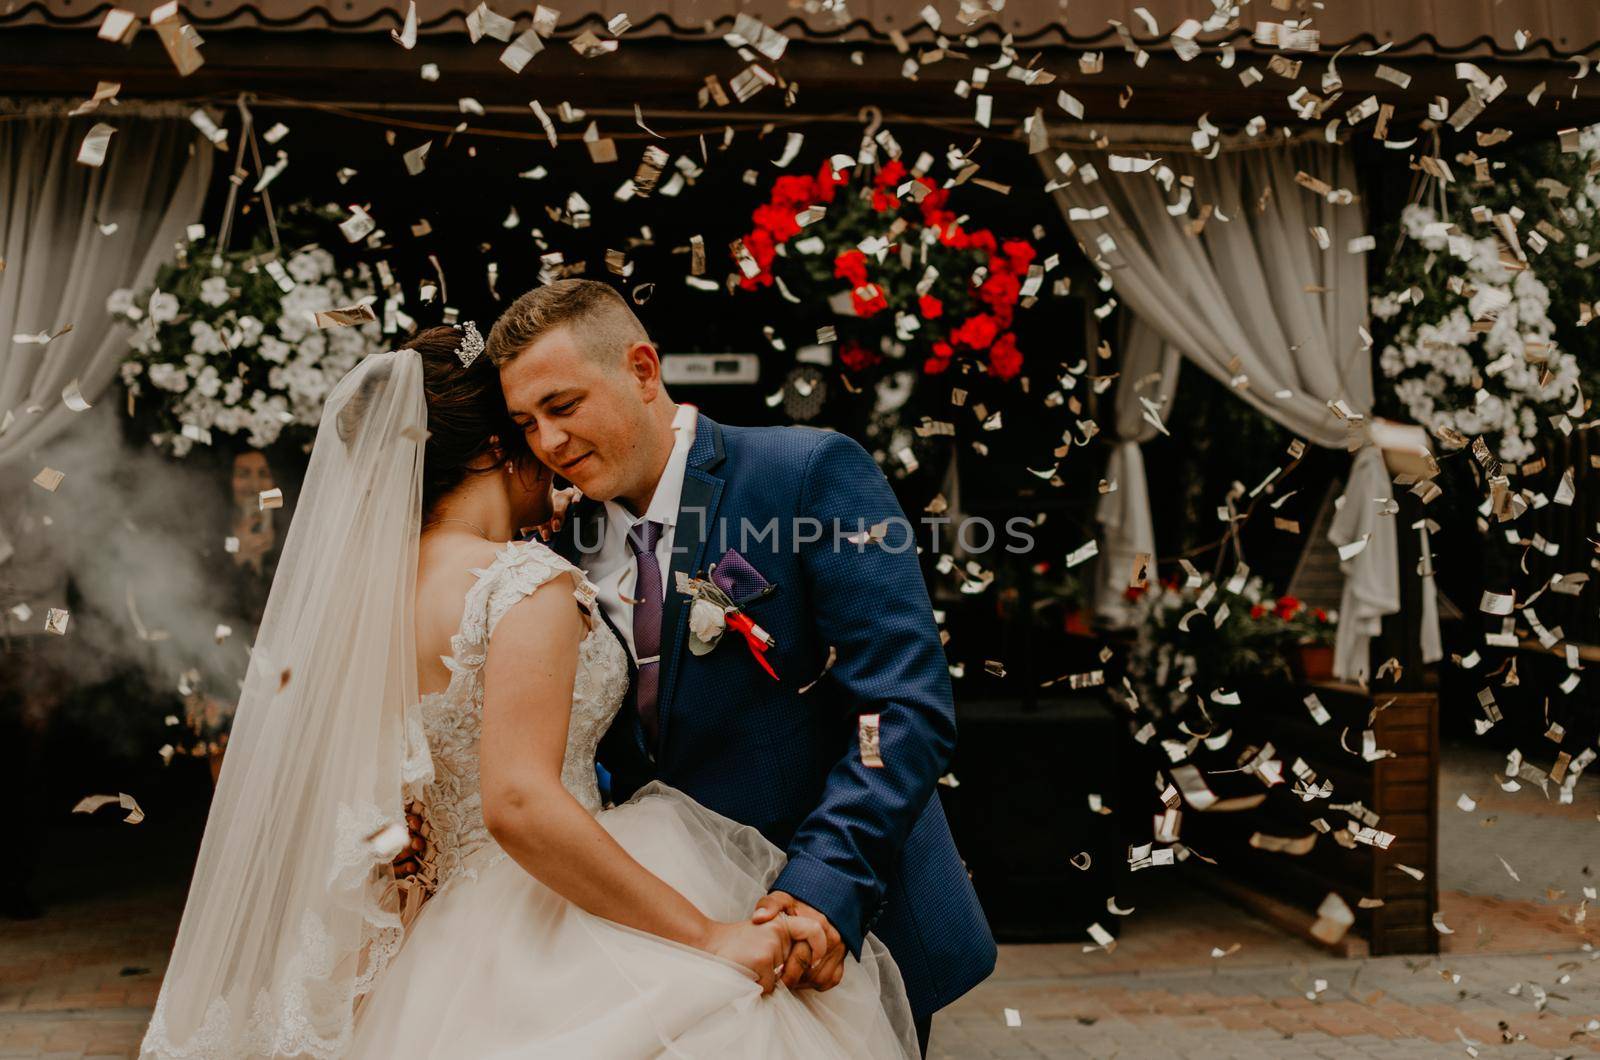 groom in suit and bride in dress in veil tiara dance together their first wedding dance. silver confetti and smoke are falling from sky on couple in love. Slavic Ukrainian Russian traditions